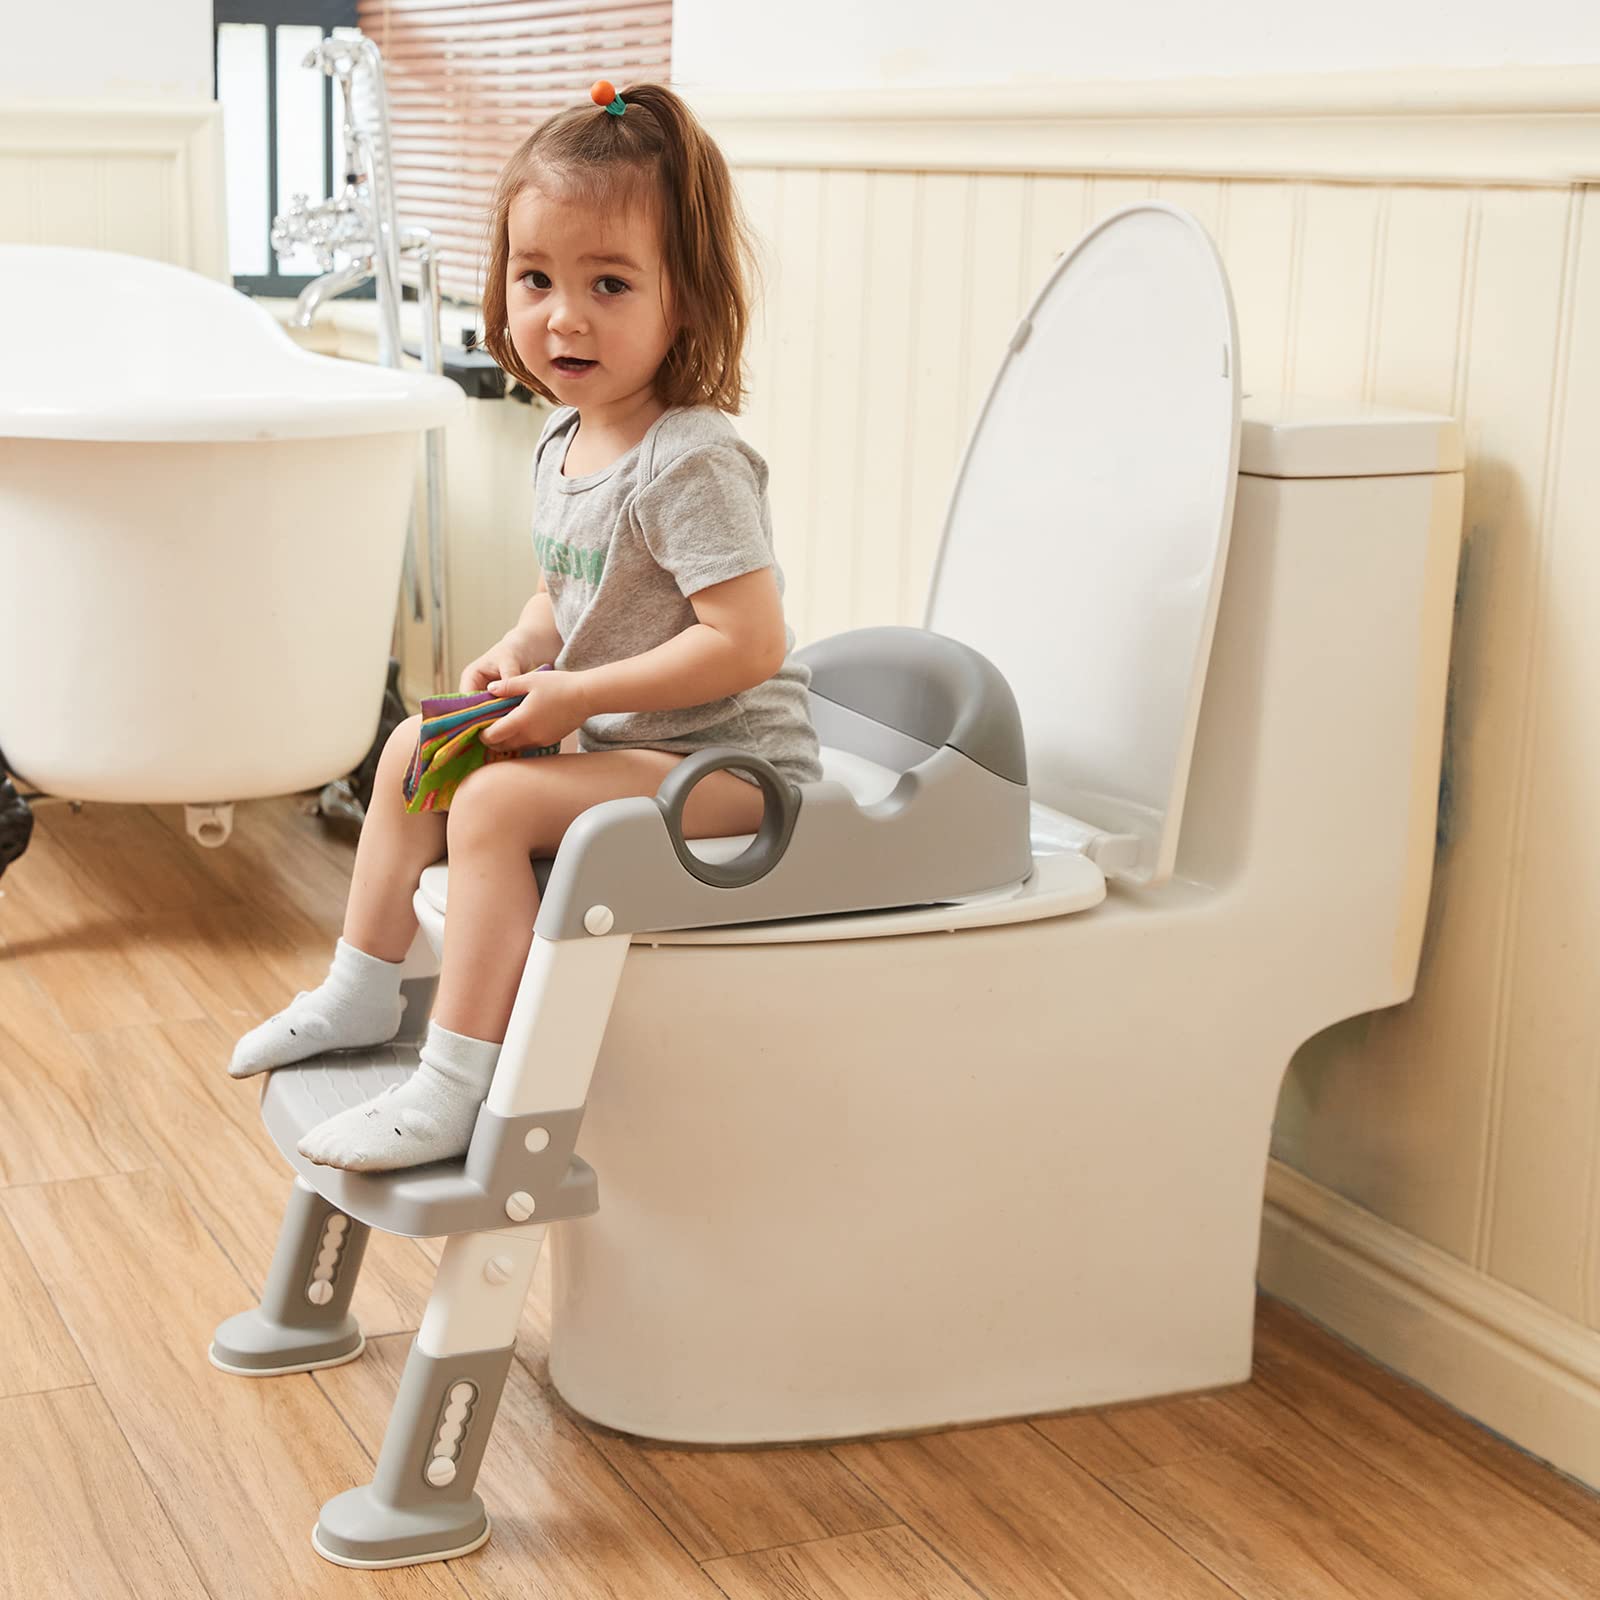 best way to toilet train a baby Child toilet training attachments : potty train